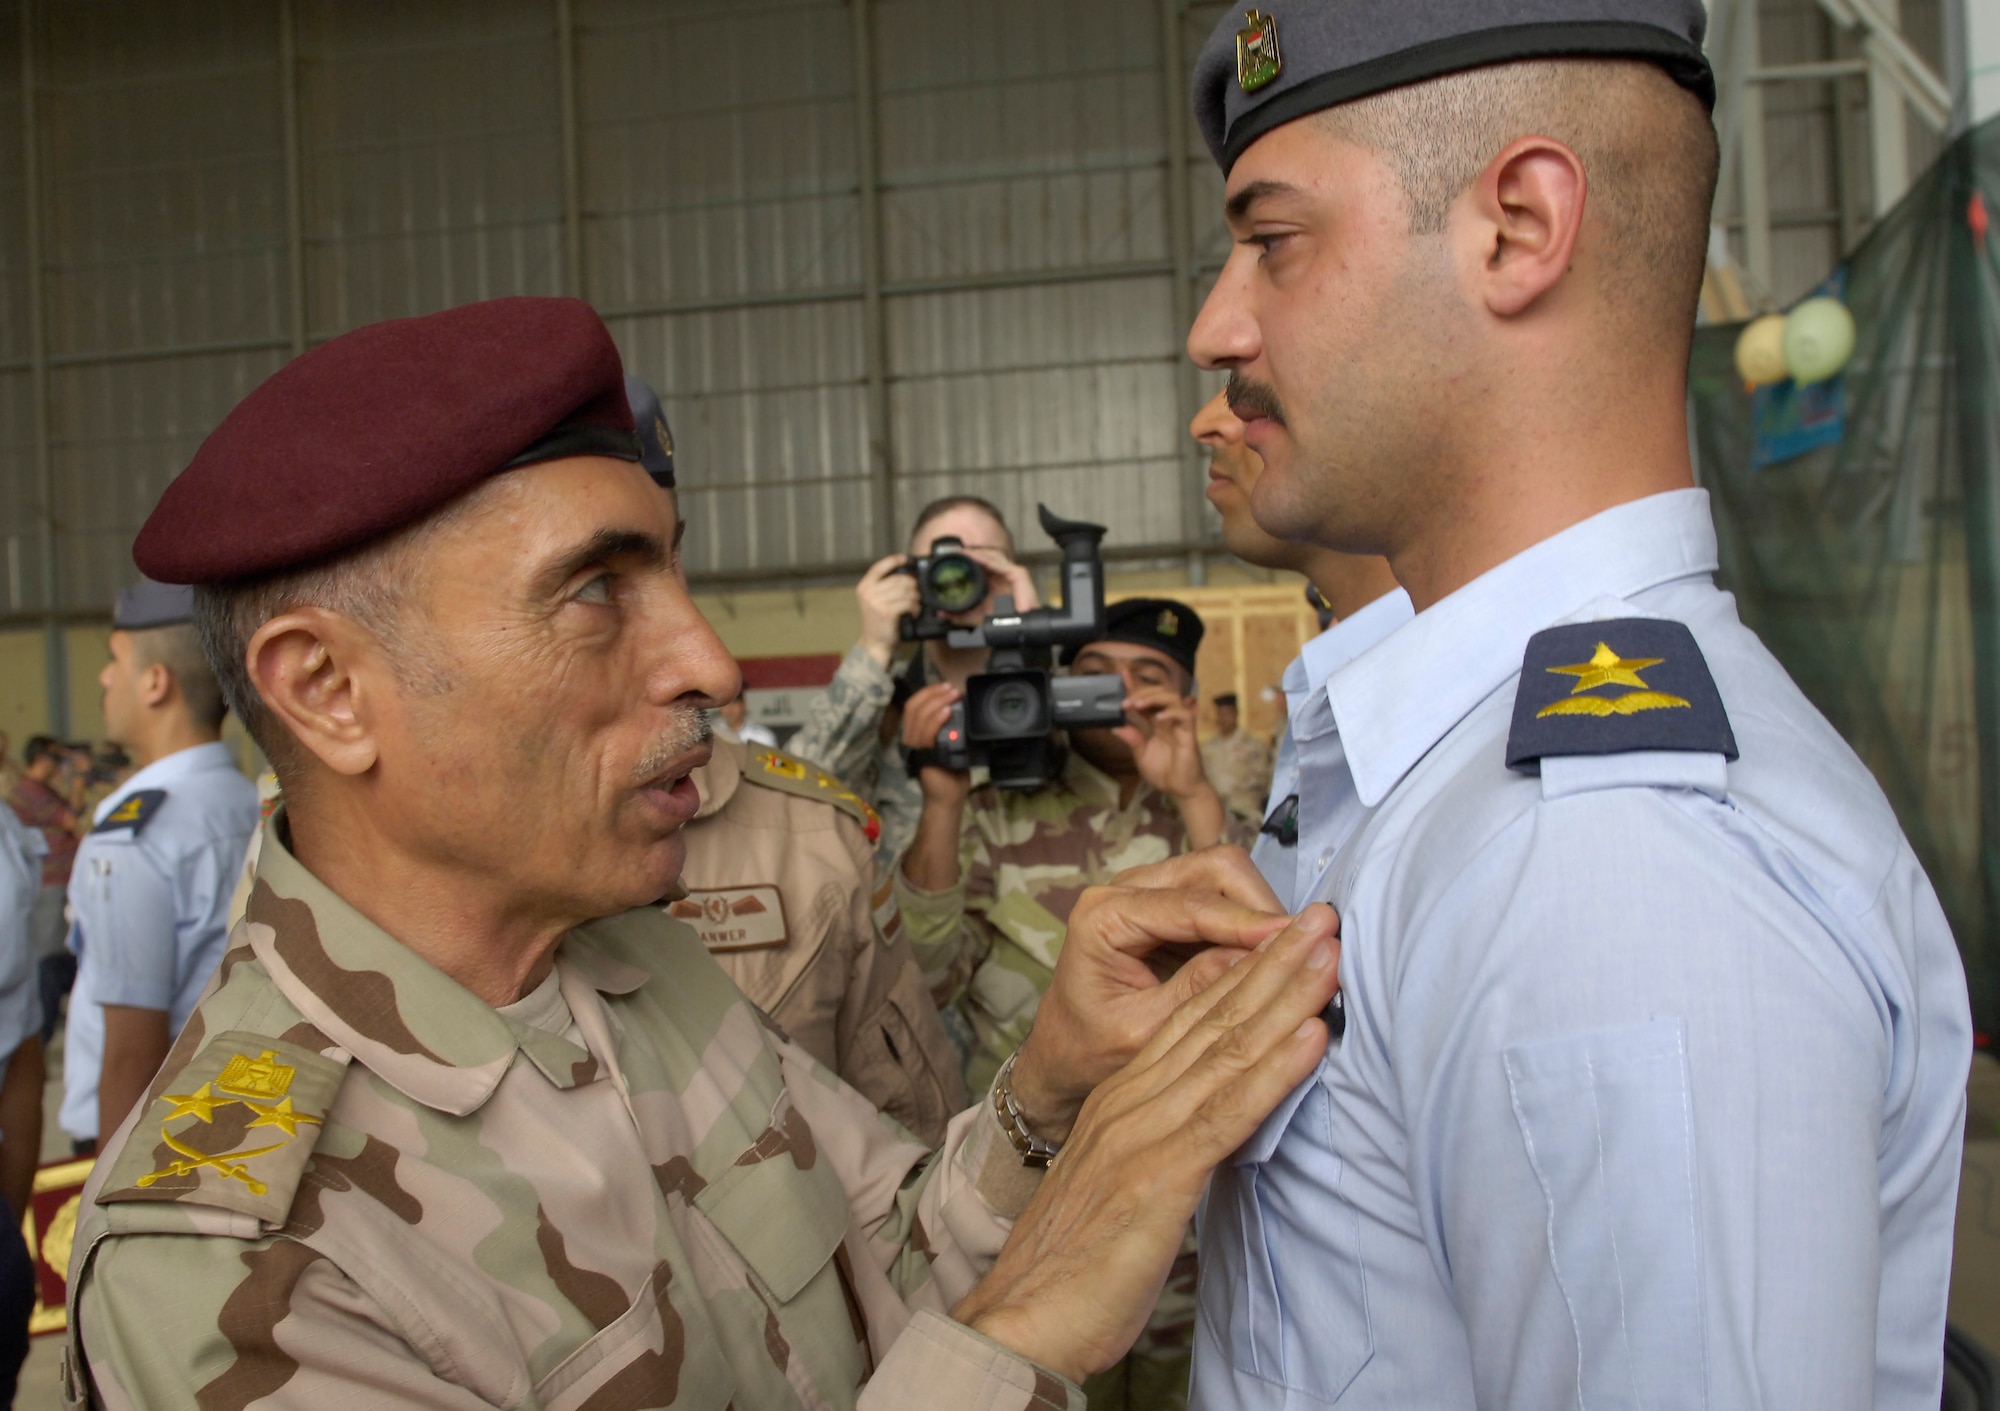 VICTORY BASE COMPLEX, Iraq – Gen. Babakir Zebari, Chief of Staff, Joint Headquarters, pins the wings on one of the newest graduates from flight training school during a ceremony April 21. The graduation ceremony was just one of many events held in celebration of the Iraqi air force’s 80th birthday. (U.S. Air Force photo by Tech. Sgt. Randy Redman) 